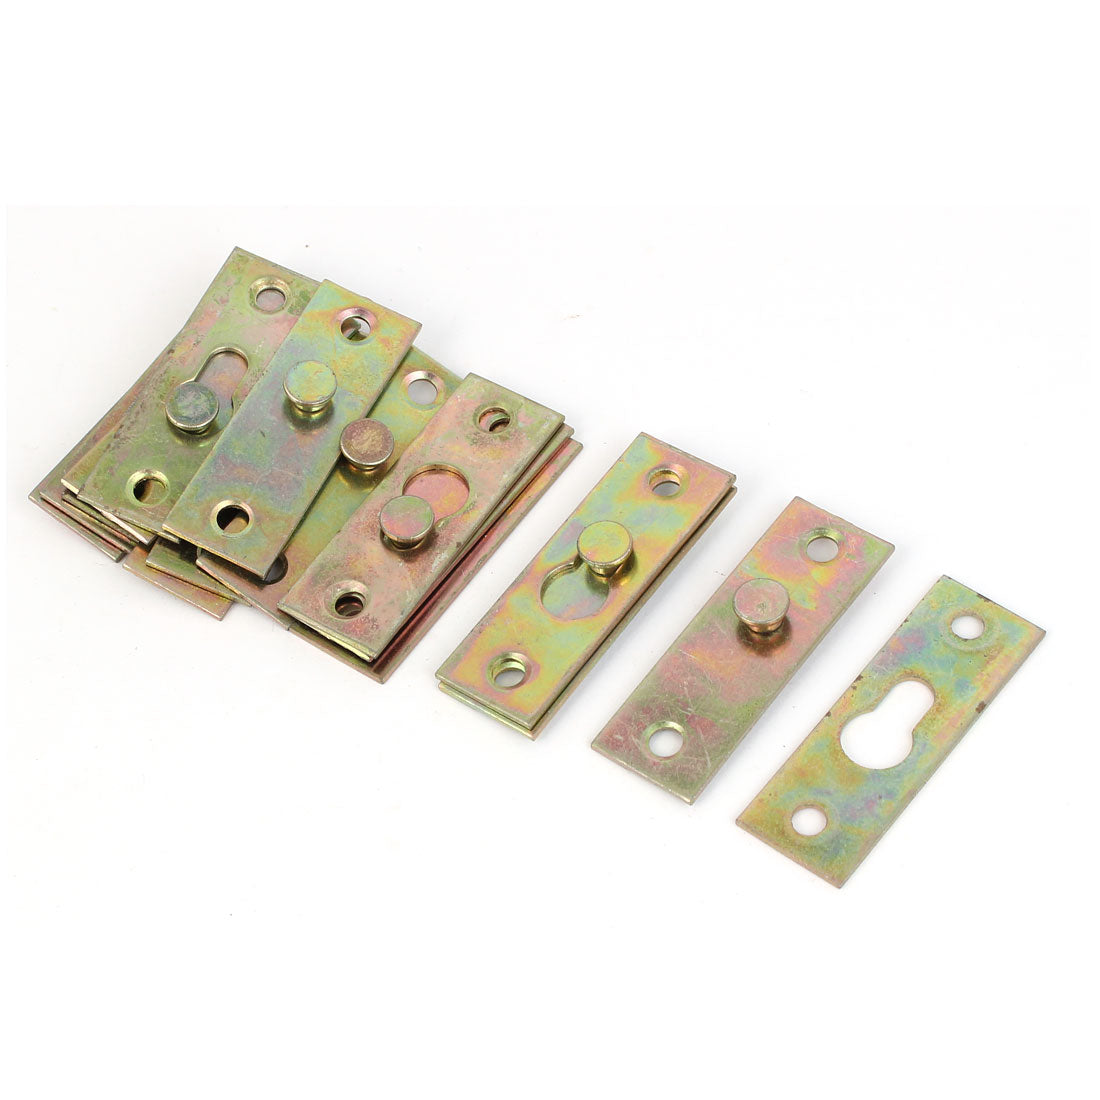 uxcell Uxcell Furniture Bed Rail Hook Plate Bracket Connector Brass Tone 8pcs